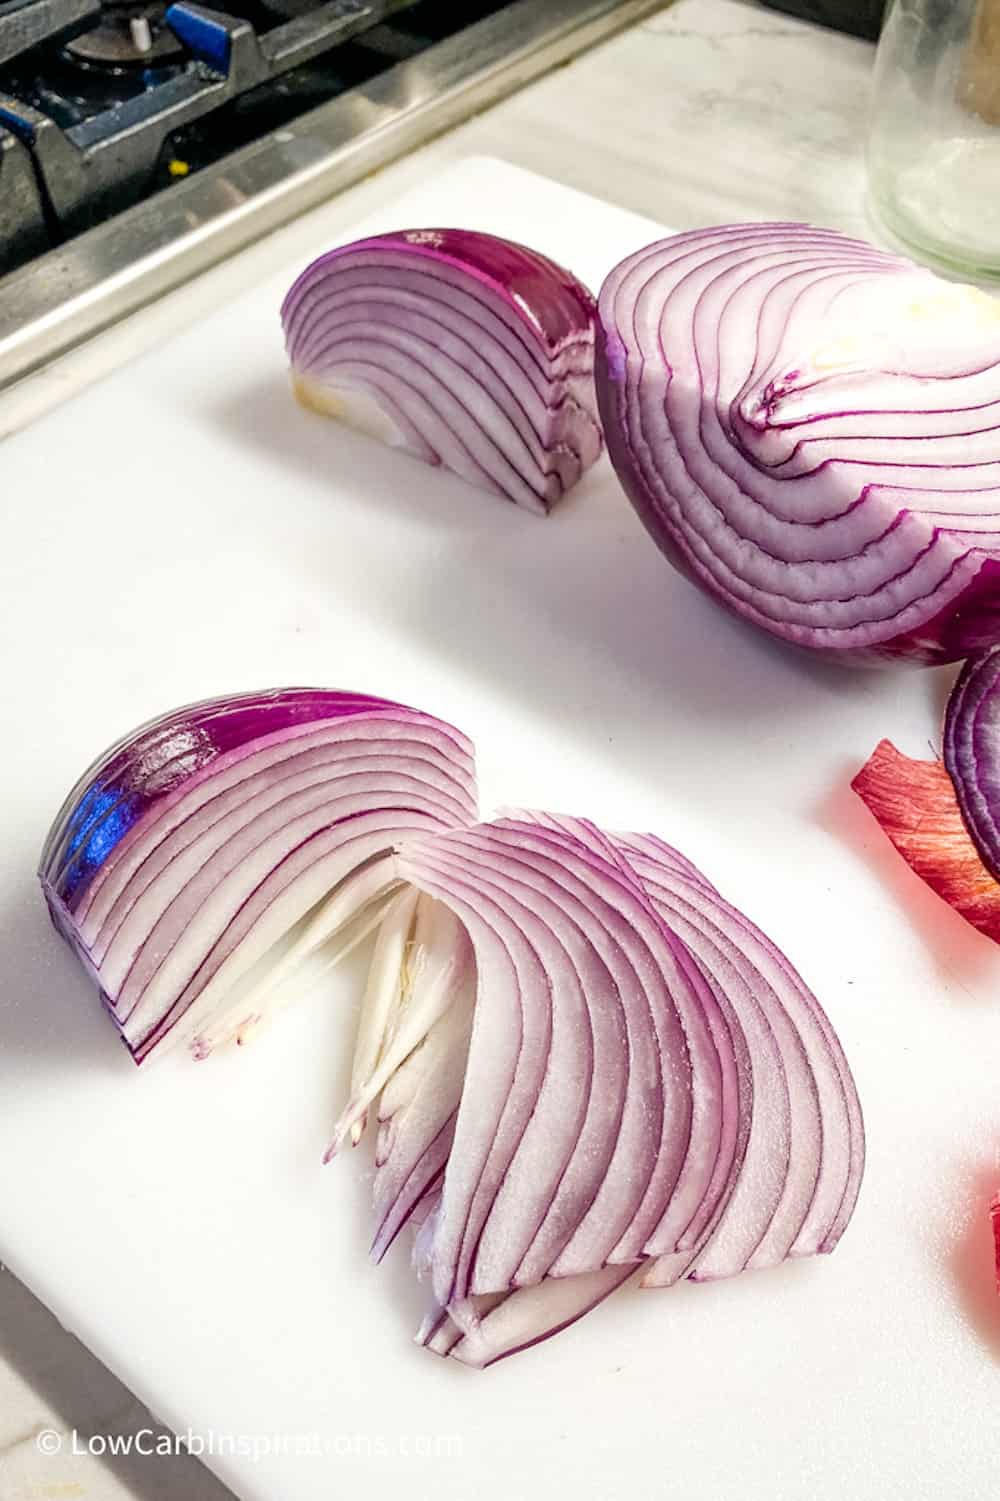 Raw Red Onions sliced thin